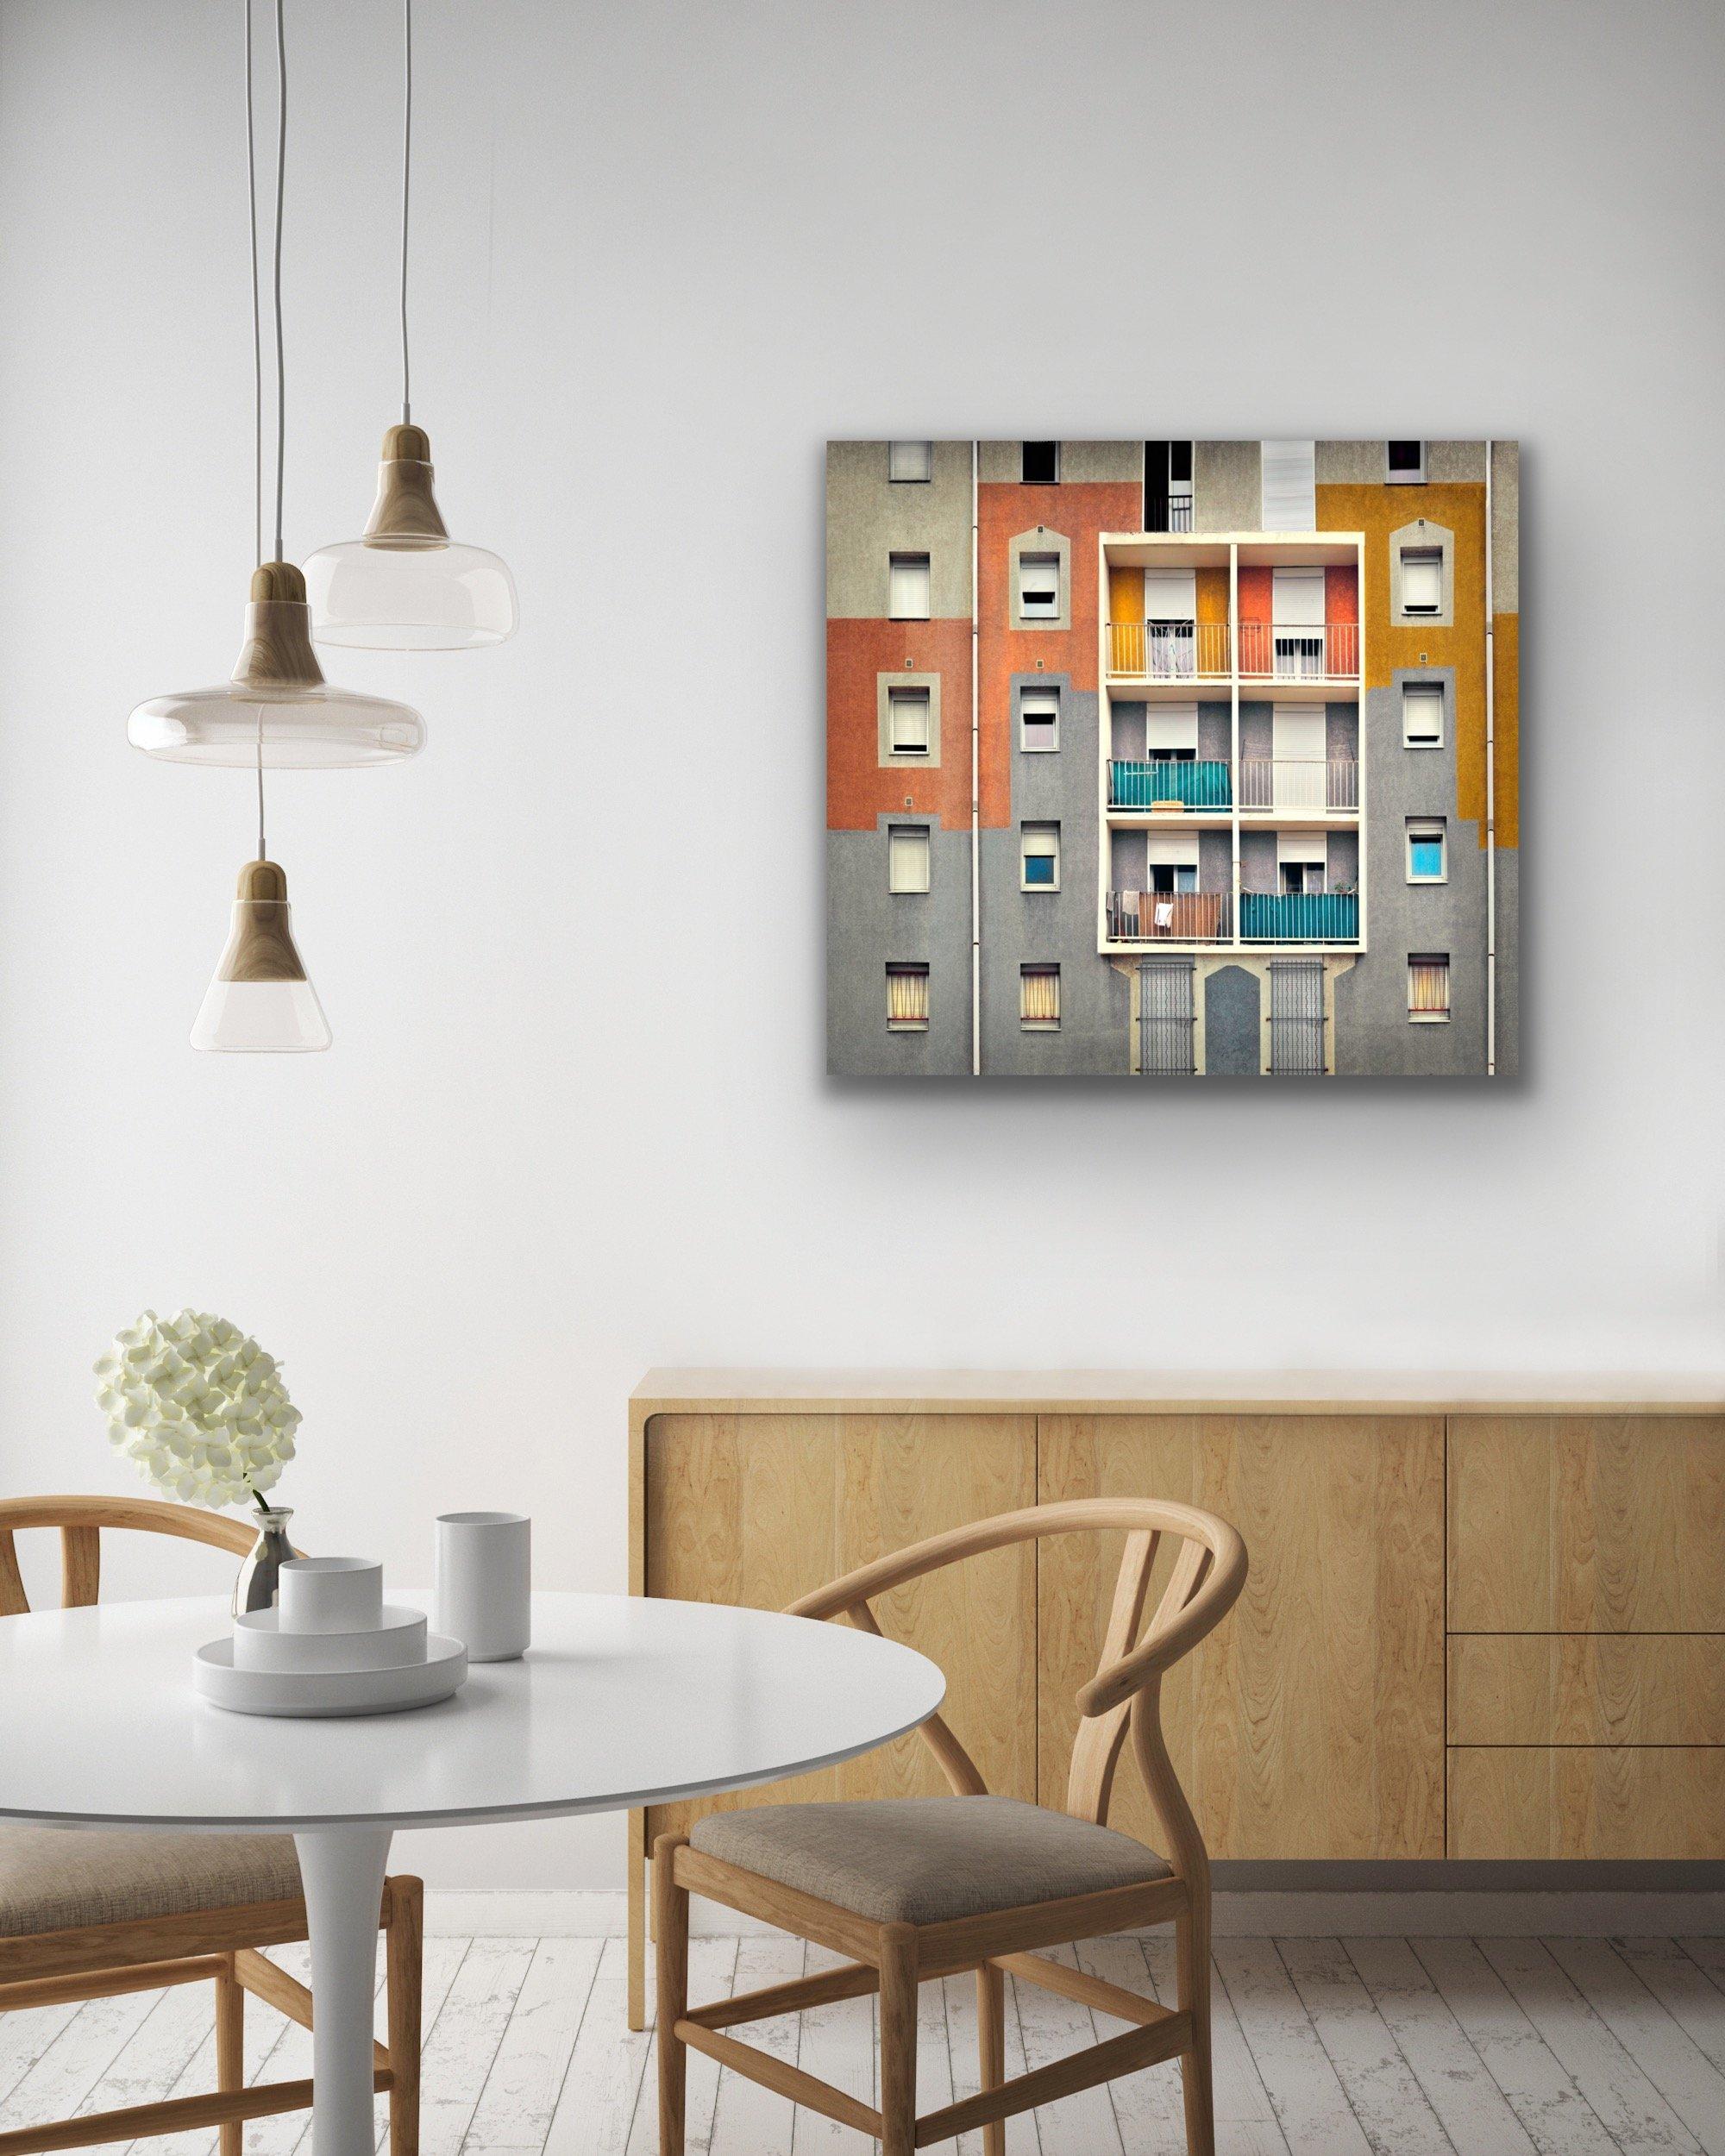 23 Flats by Barry Cawston 120cm x 110cm C-type photograph w/Acrylic Face Mount For Sale 1